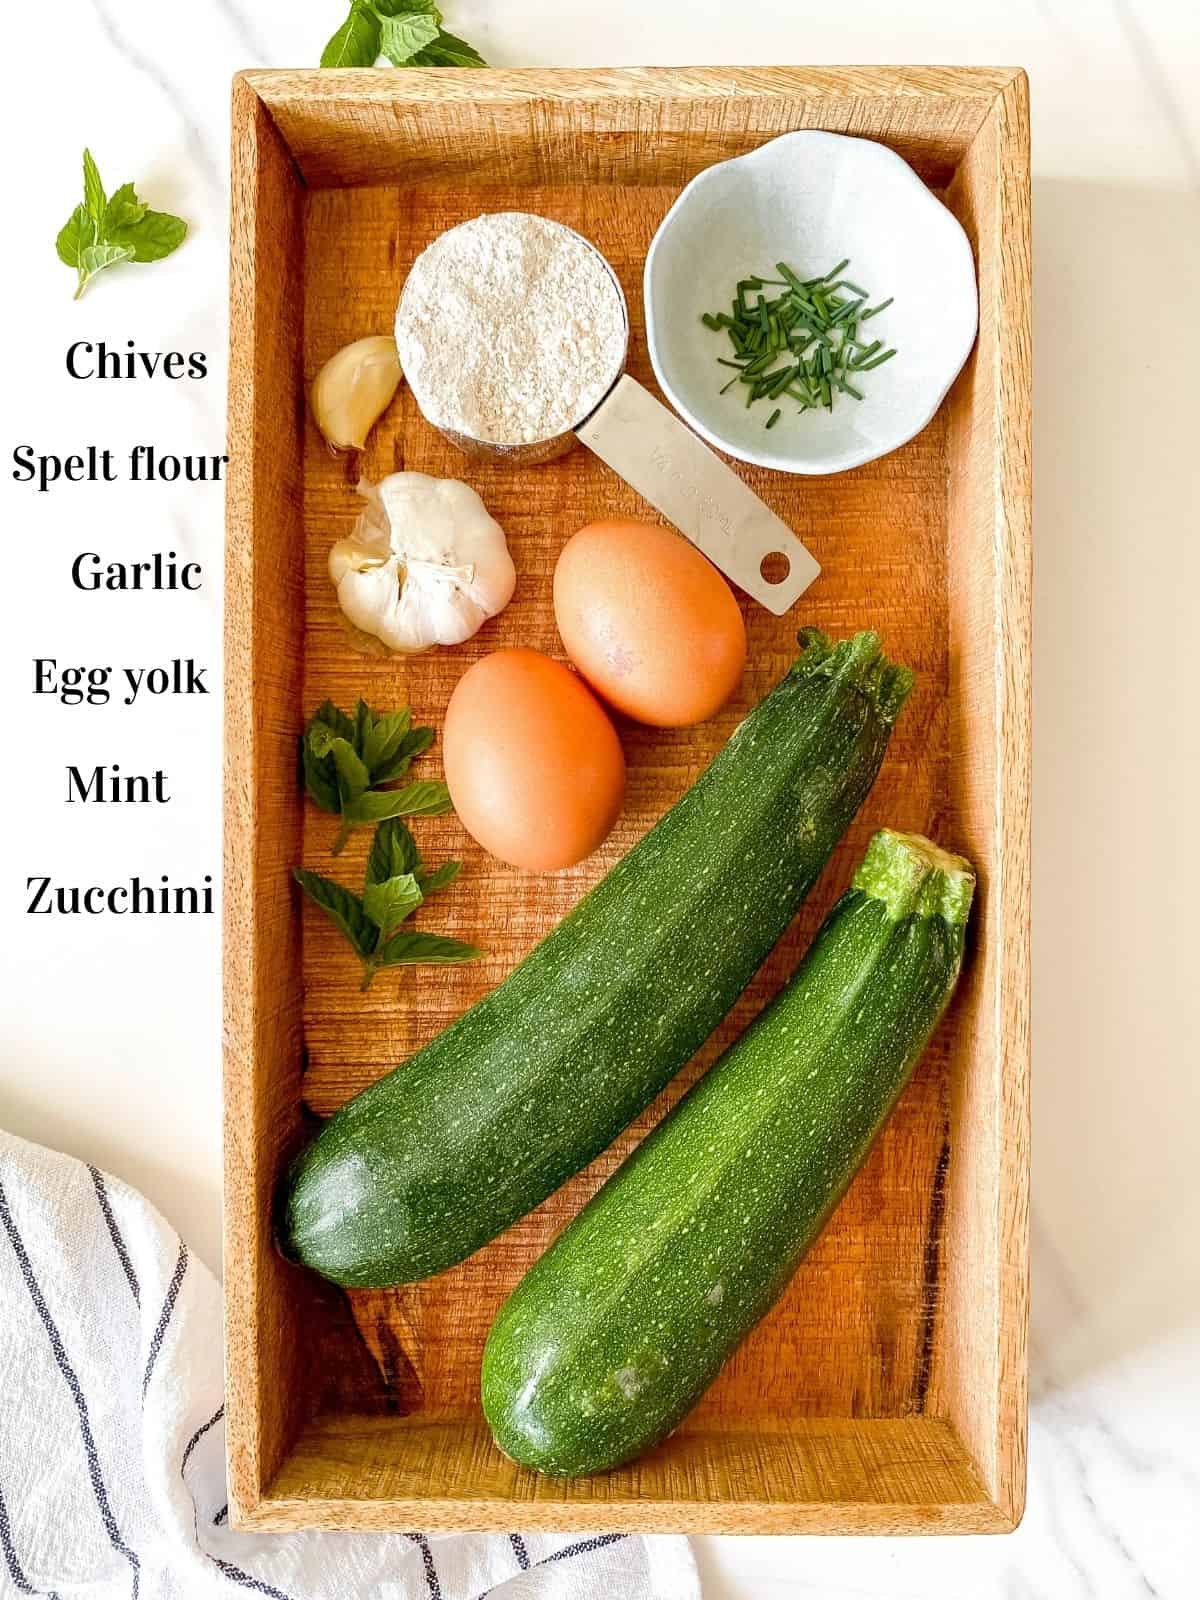 wooden box containing labelled zucchini, mint, garlic, chives, spelt flour and eggs.